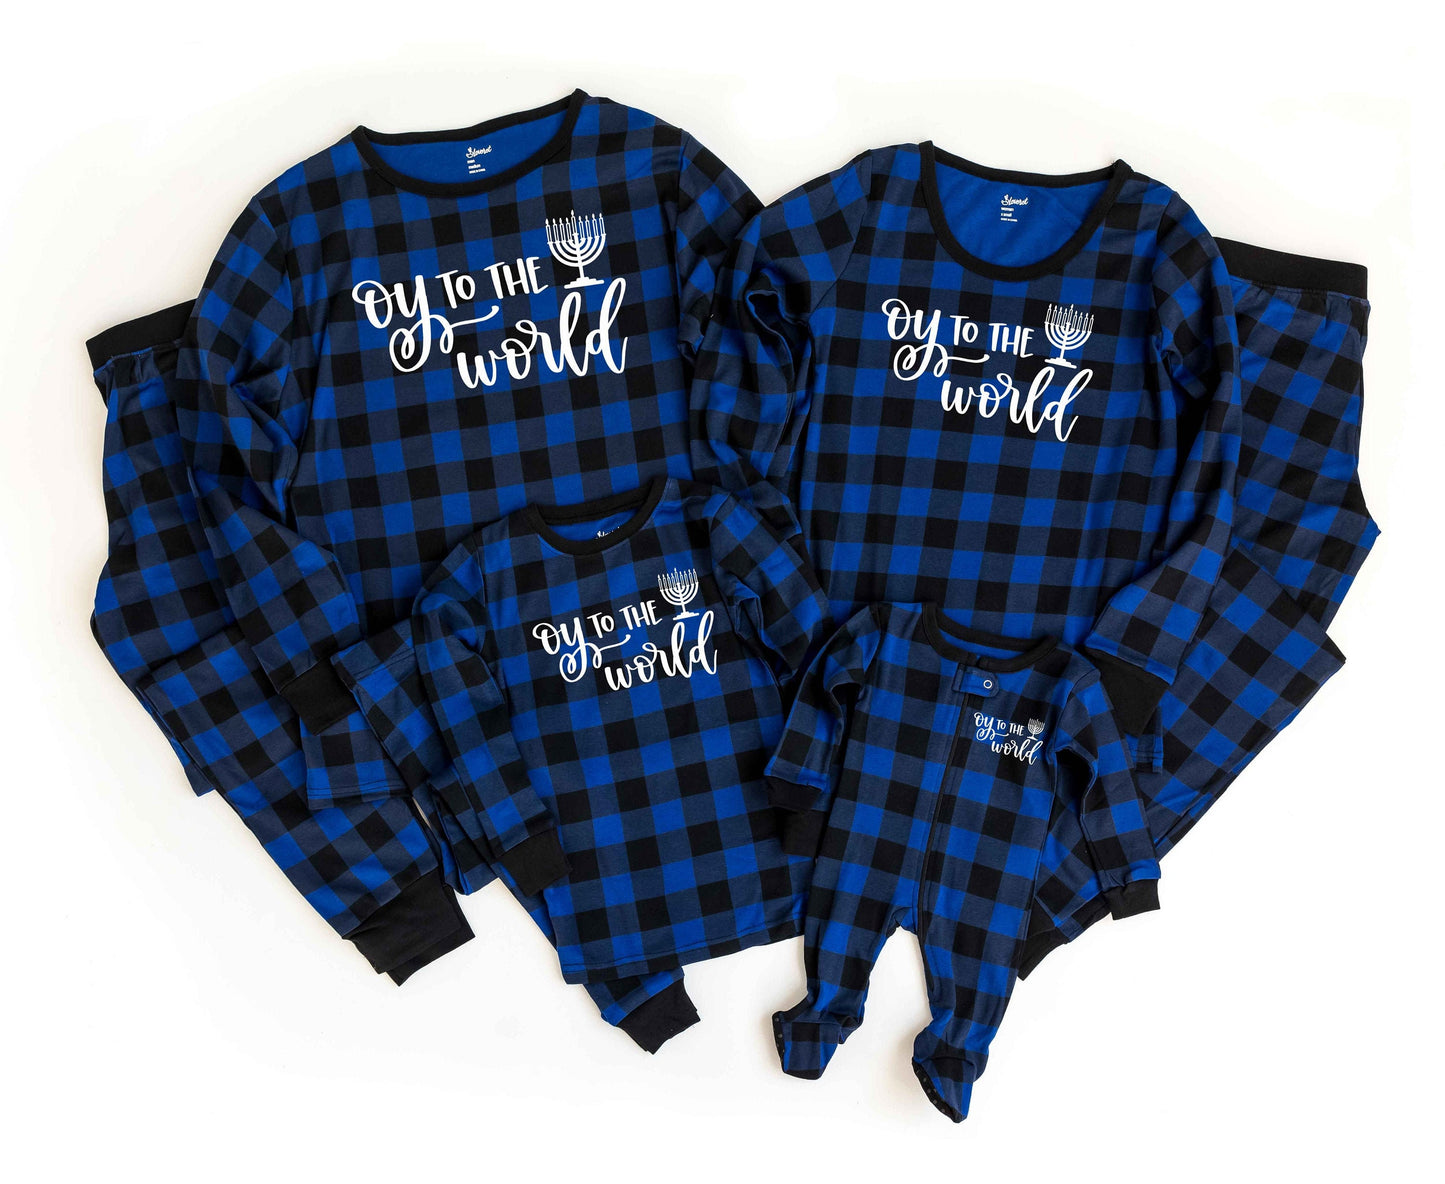 Oy to the World Blue Plaid Family Chanukah Pajamas, hanukkah family pajamas - women's hanukkah jammies - matching family chanukah pjs